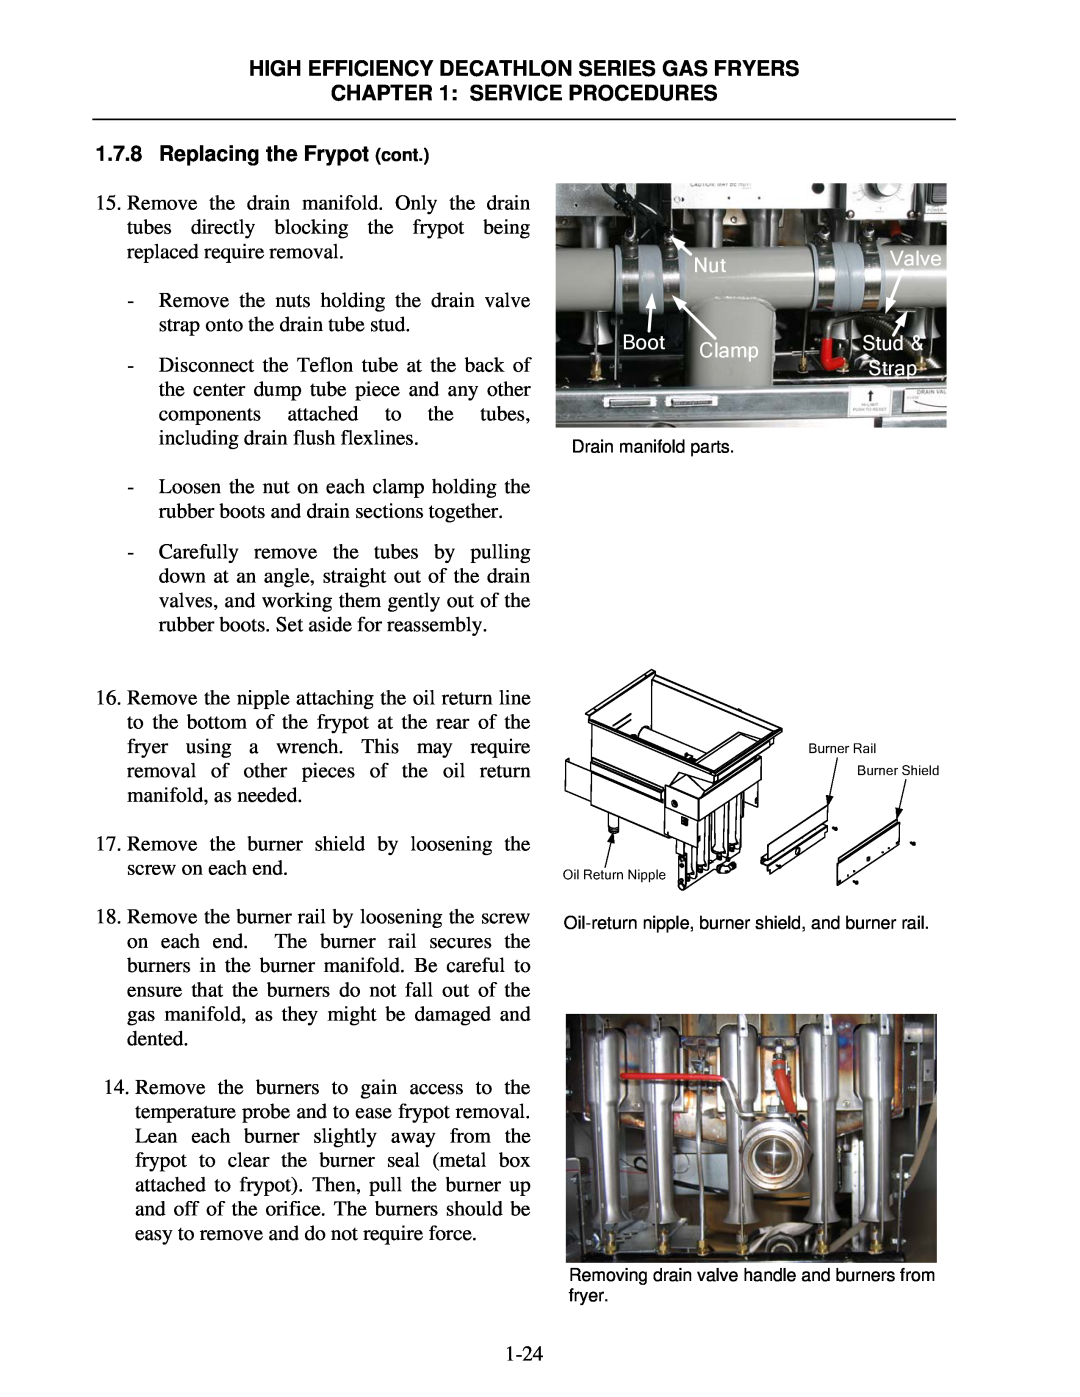 Frymaster FPHD High Efficiency Decathlon Series Gas Fryers, Service Procedures, Replacing the Frypot cont, Valve, Boot 